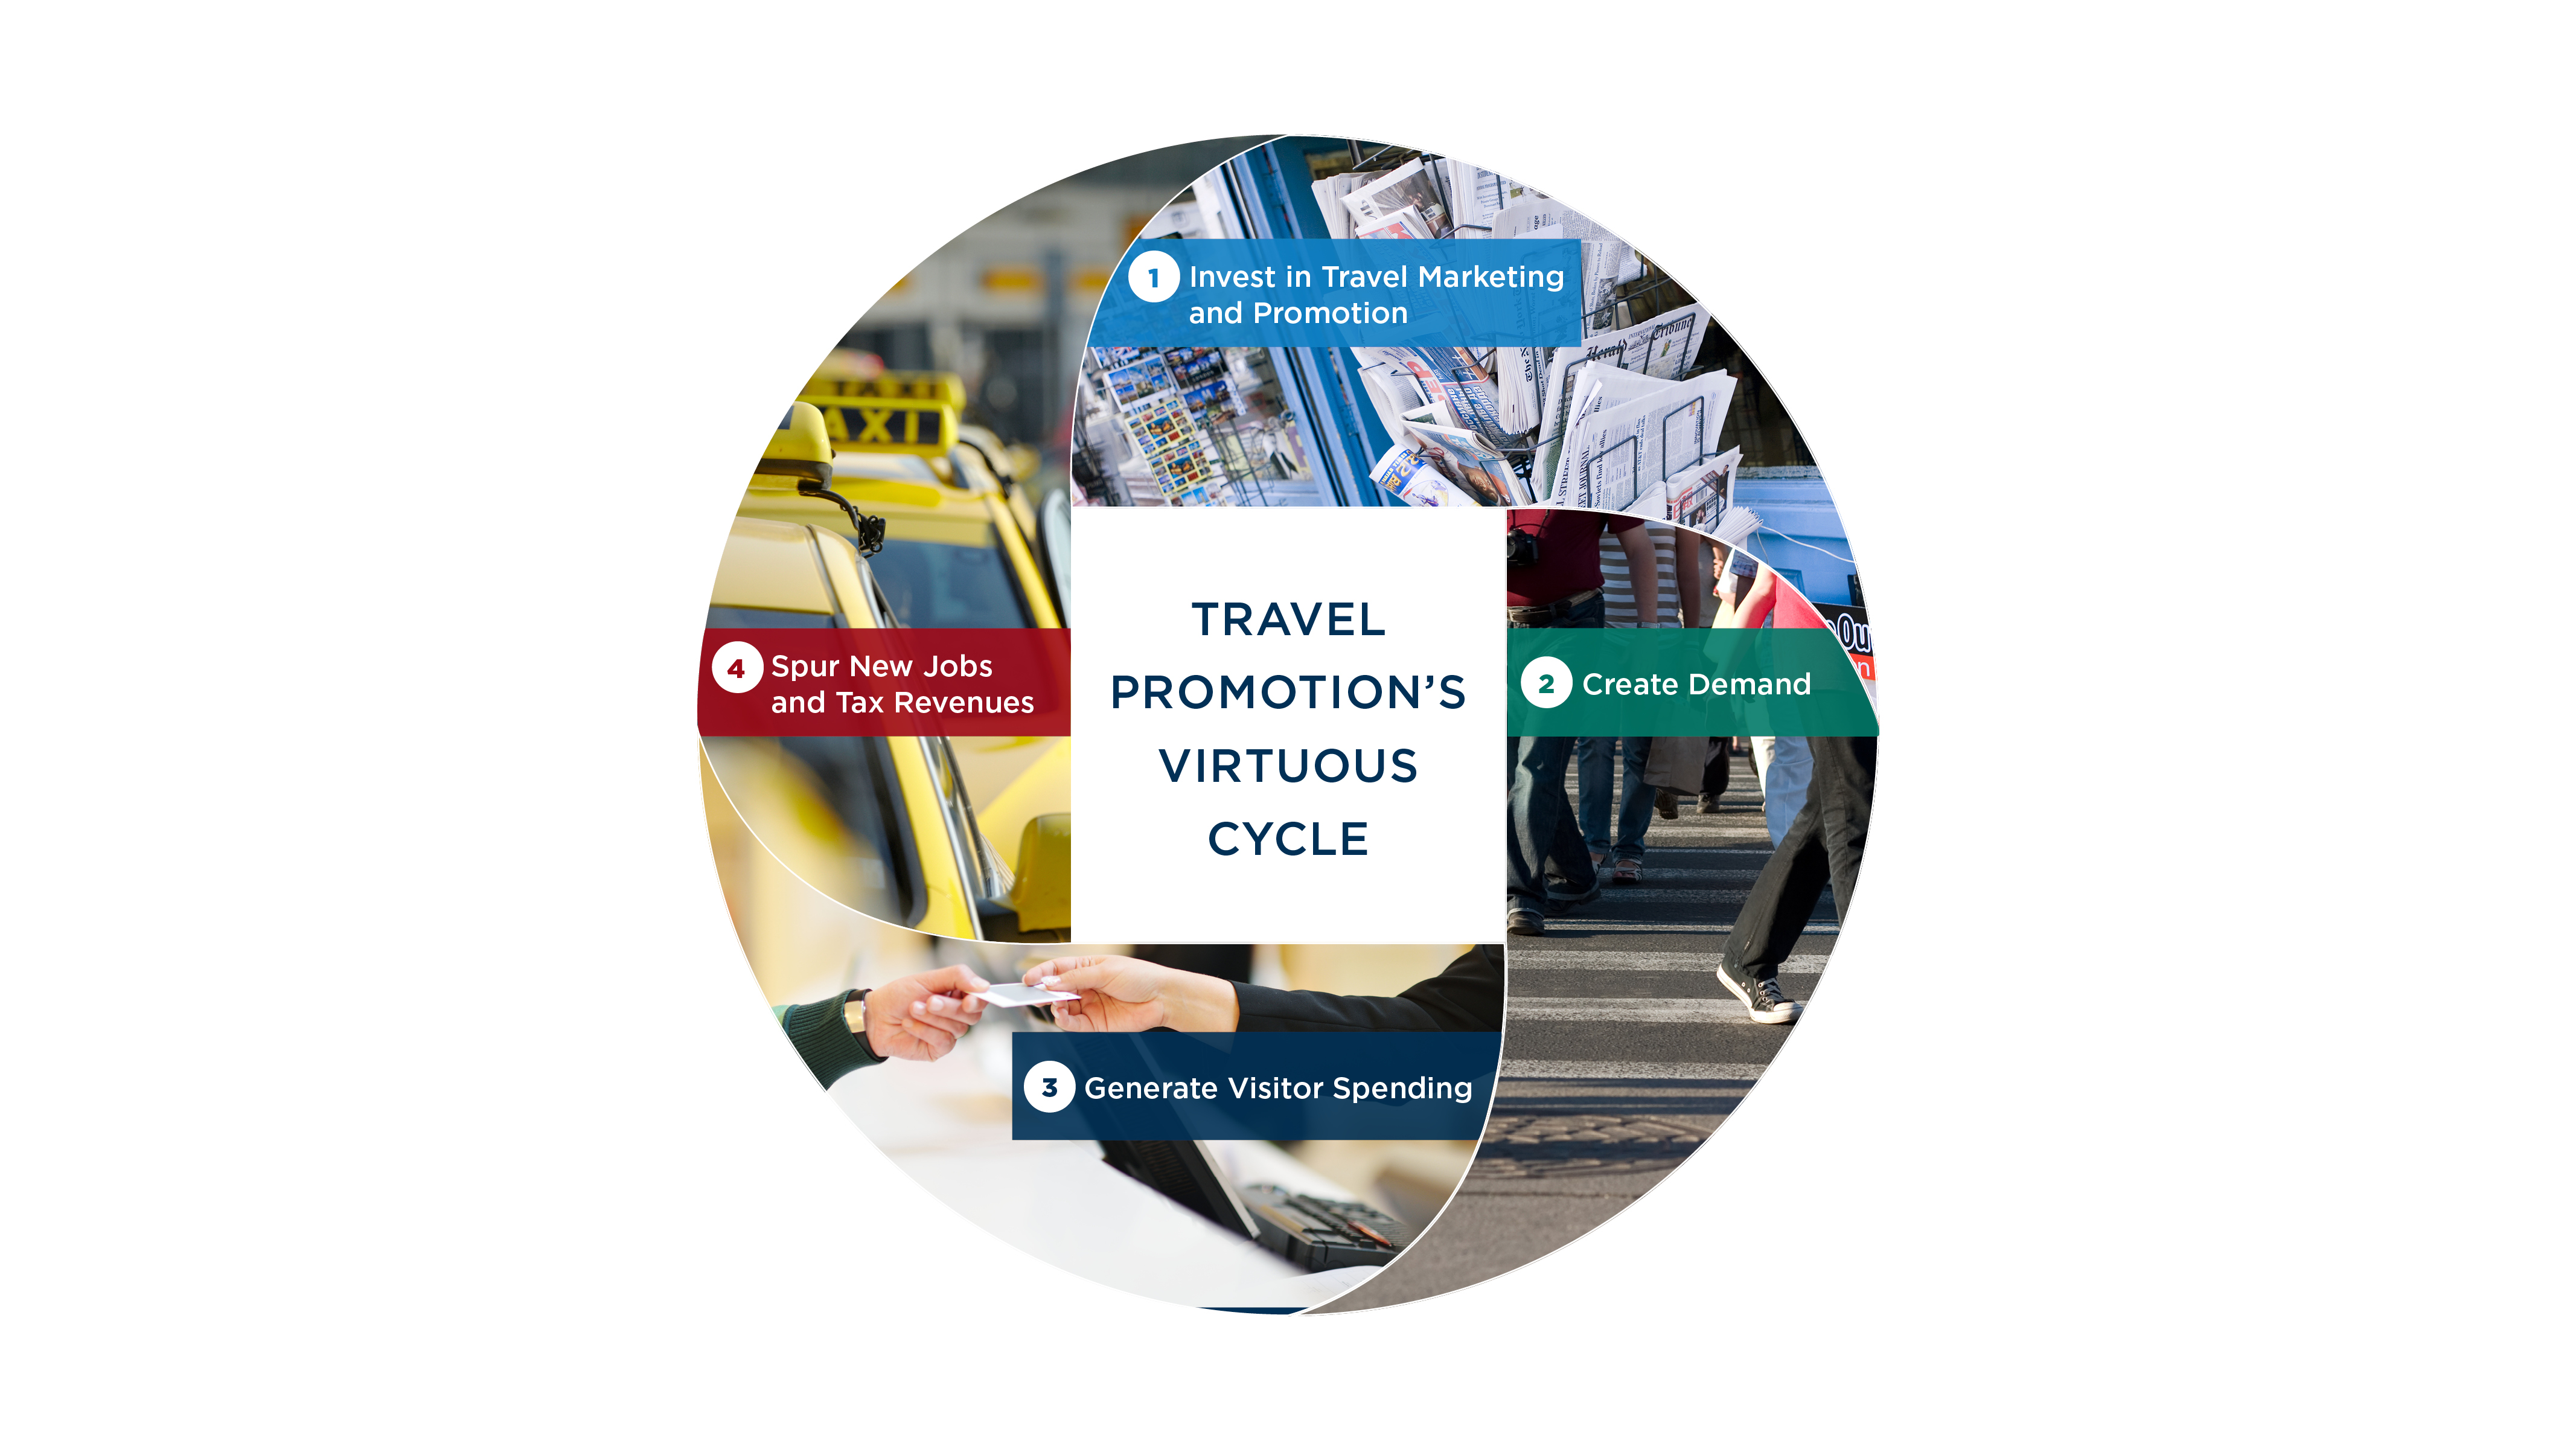 media Travel Promotion's Virtuous Cycle.jpg